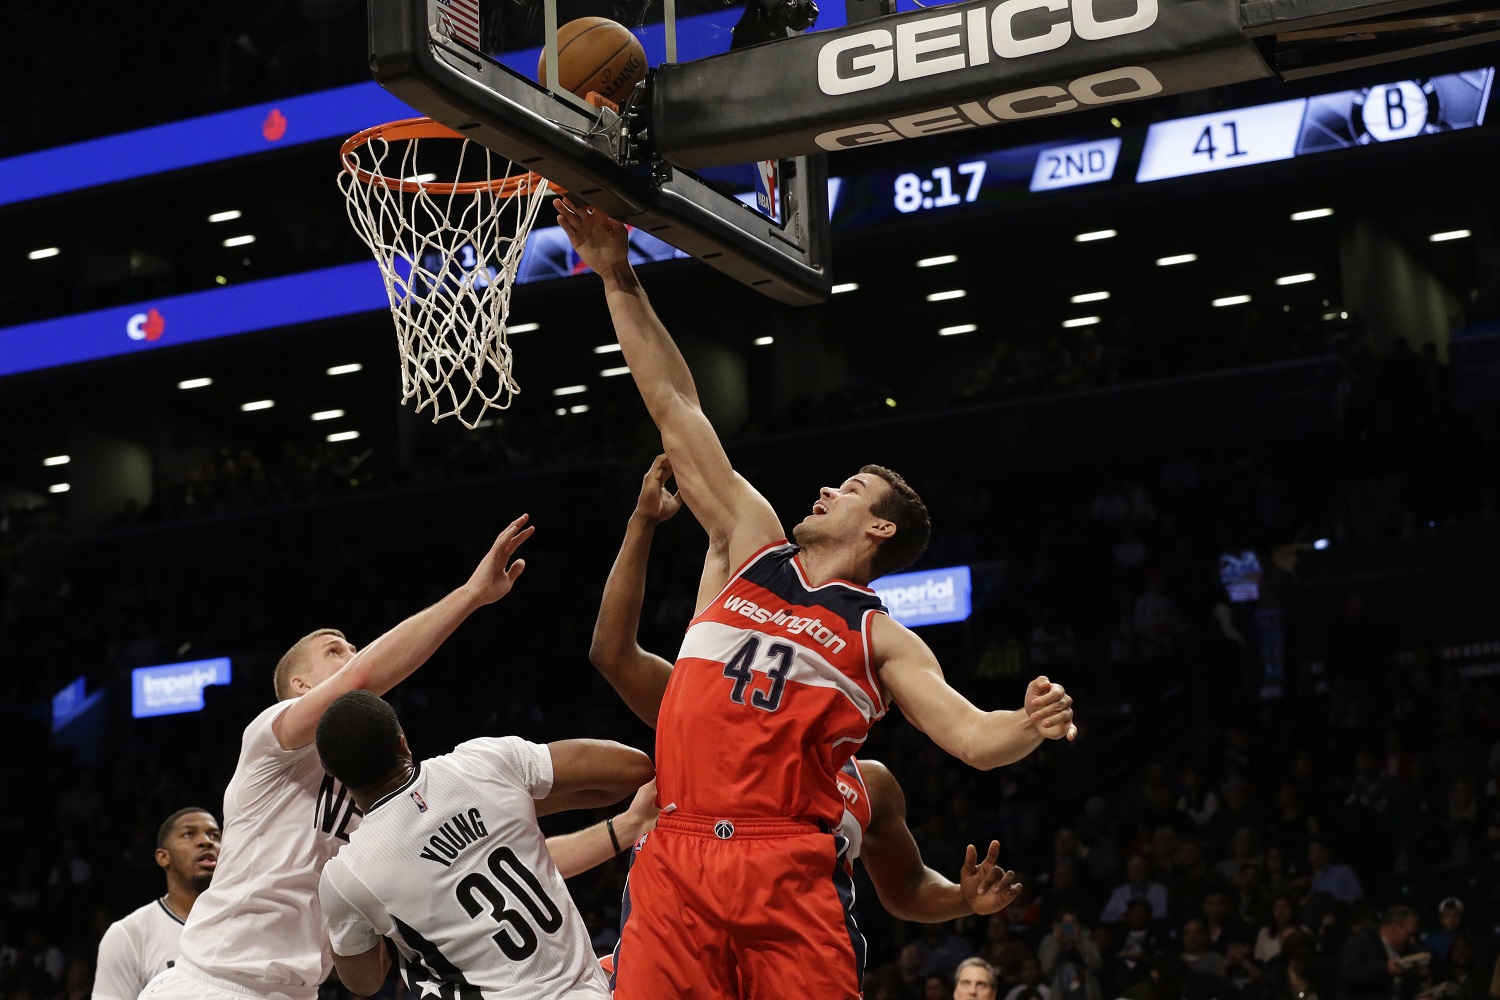 Washington Wizards forward Kris Humphries (43) goes to the basket past Brooklyn Nets forward Thaddeus Young (30) and center Mason Plumlee during the first half of an NBA basketball game, Friday, April 10, 2015, at  New York.  (AP Photo/Mary Altaffer)